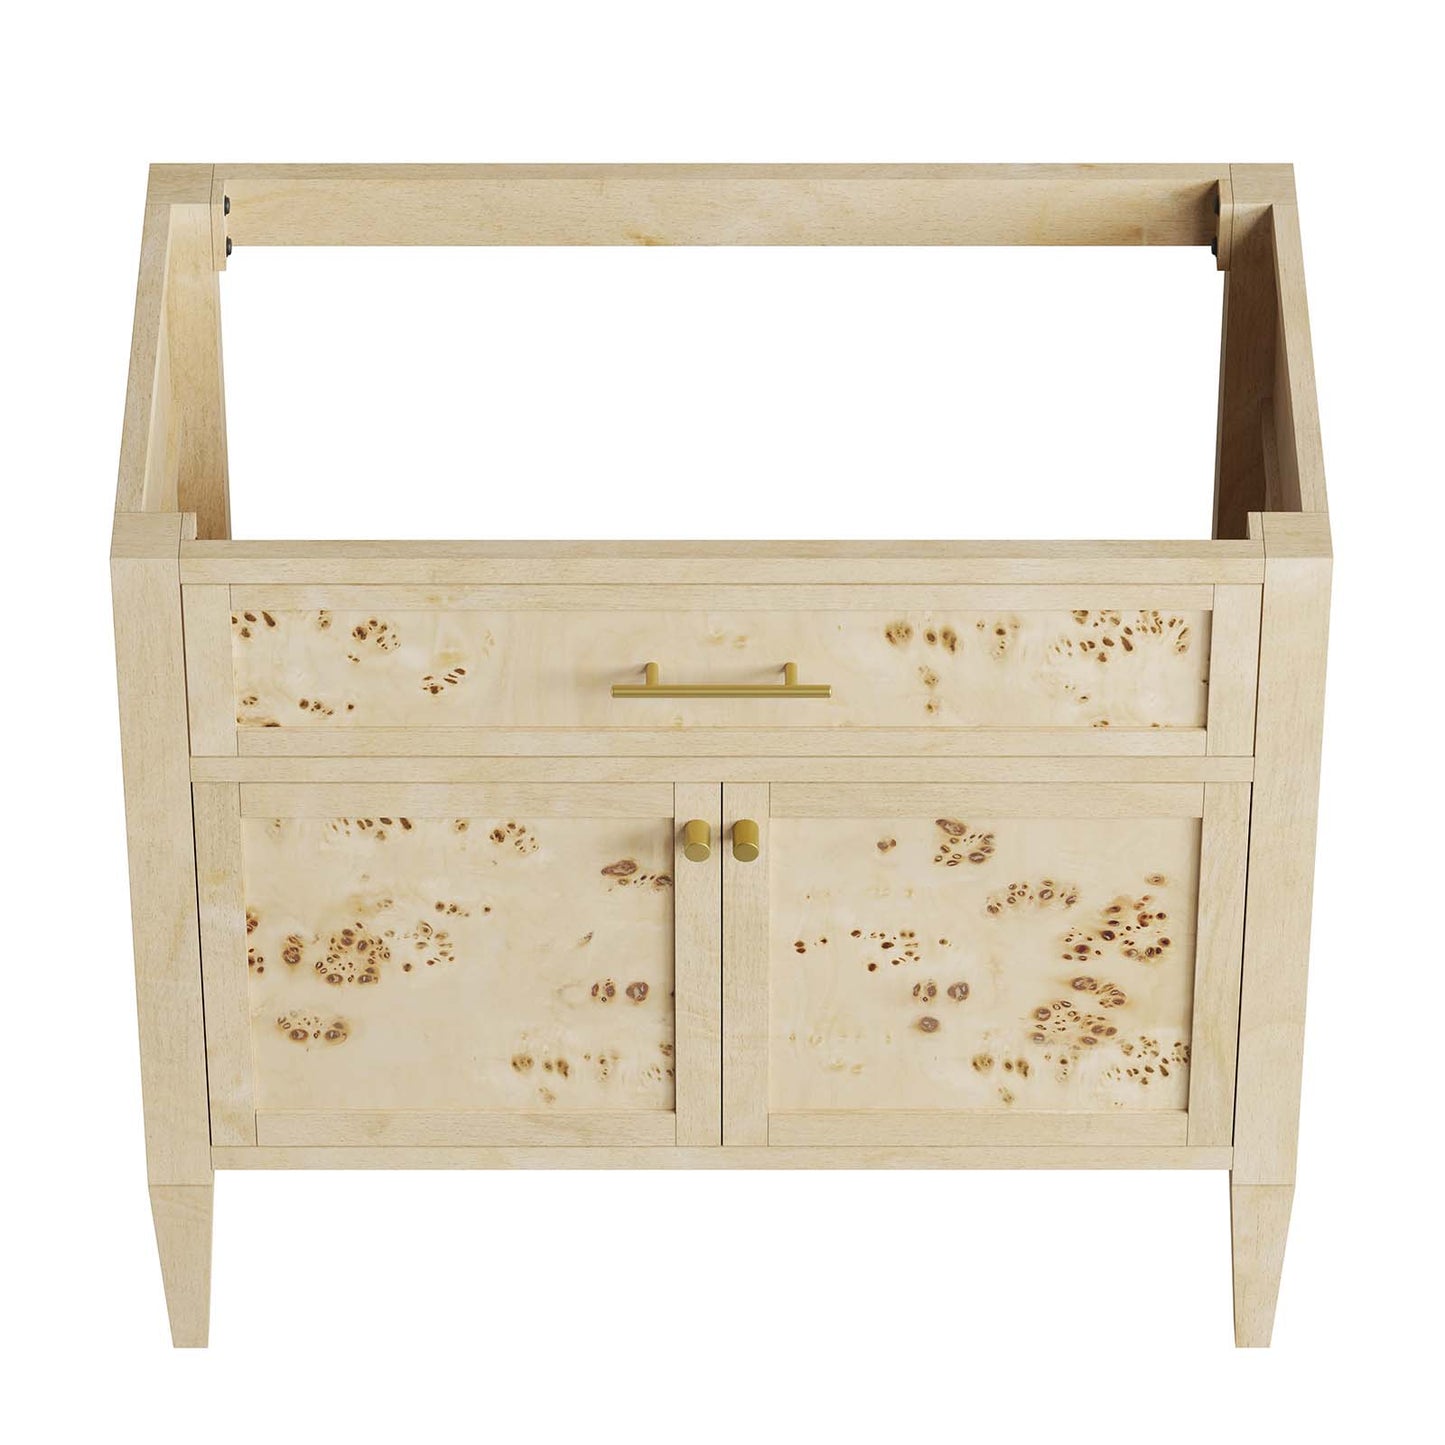 Elysian 36" Wood Bathroom Vanity Cabinet (Sink Basin Not Included) By Modway - EEI-6139 | Bathroom Accessories | Modway - 14